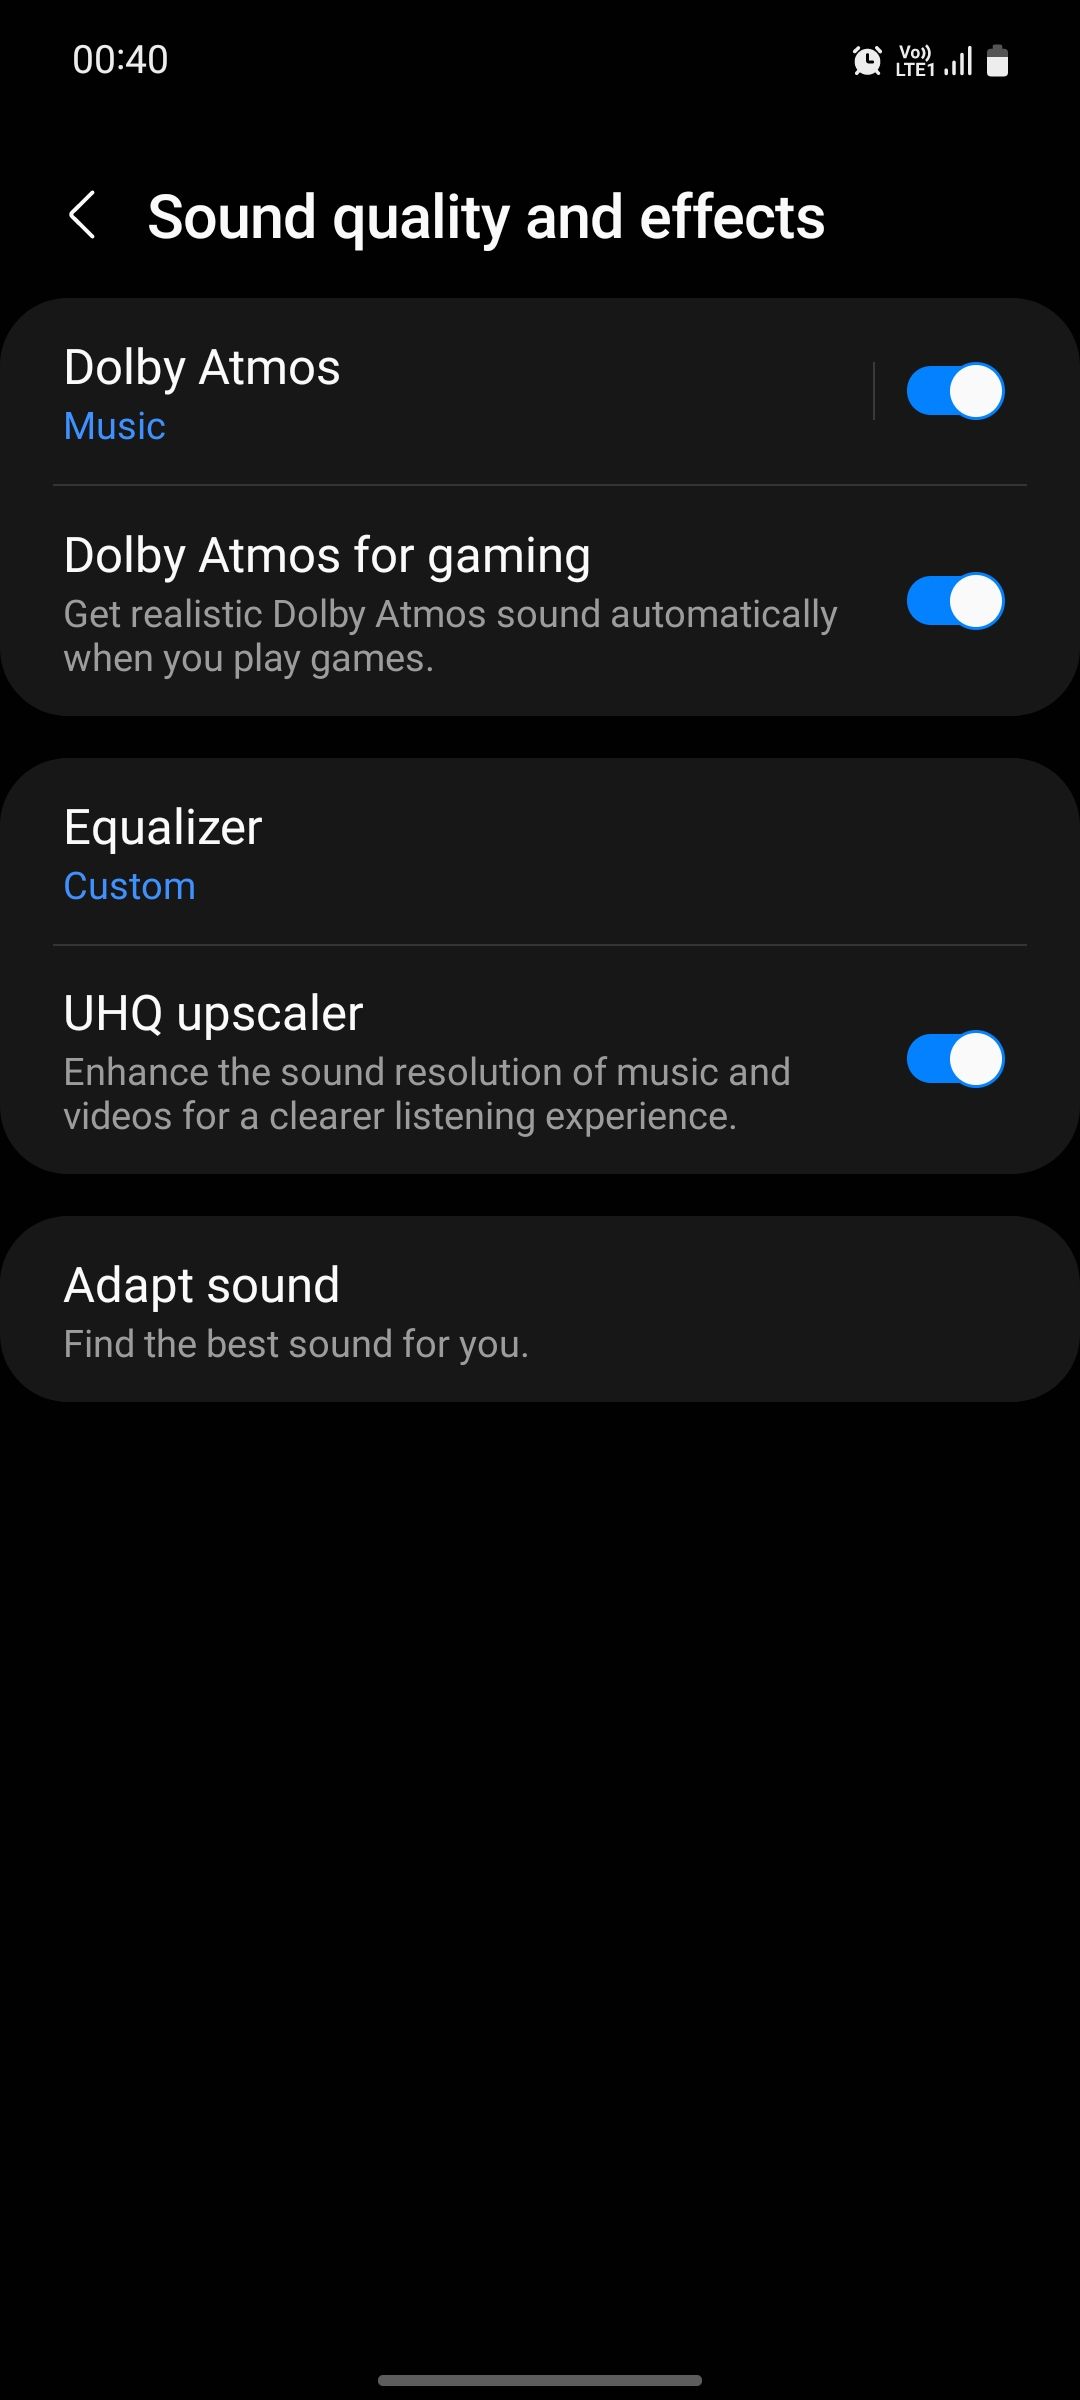 Samsung sound quality and effects UHQ upscaler